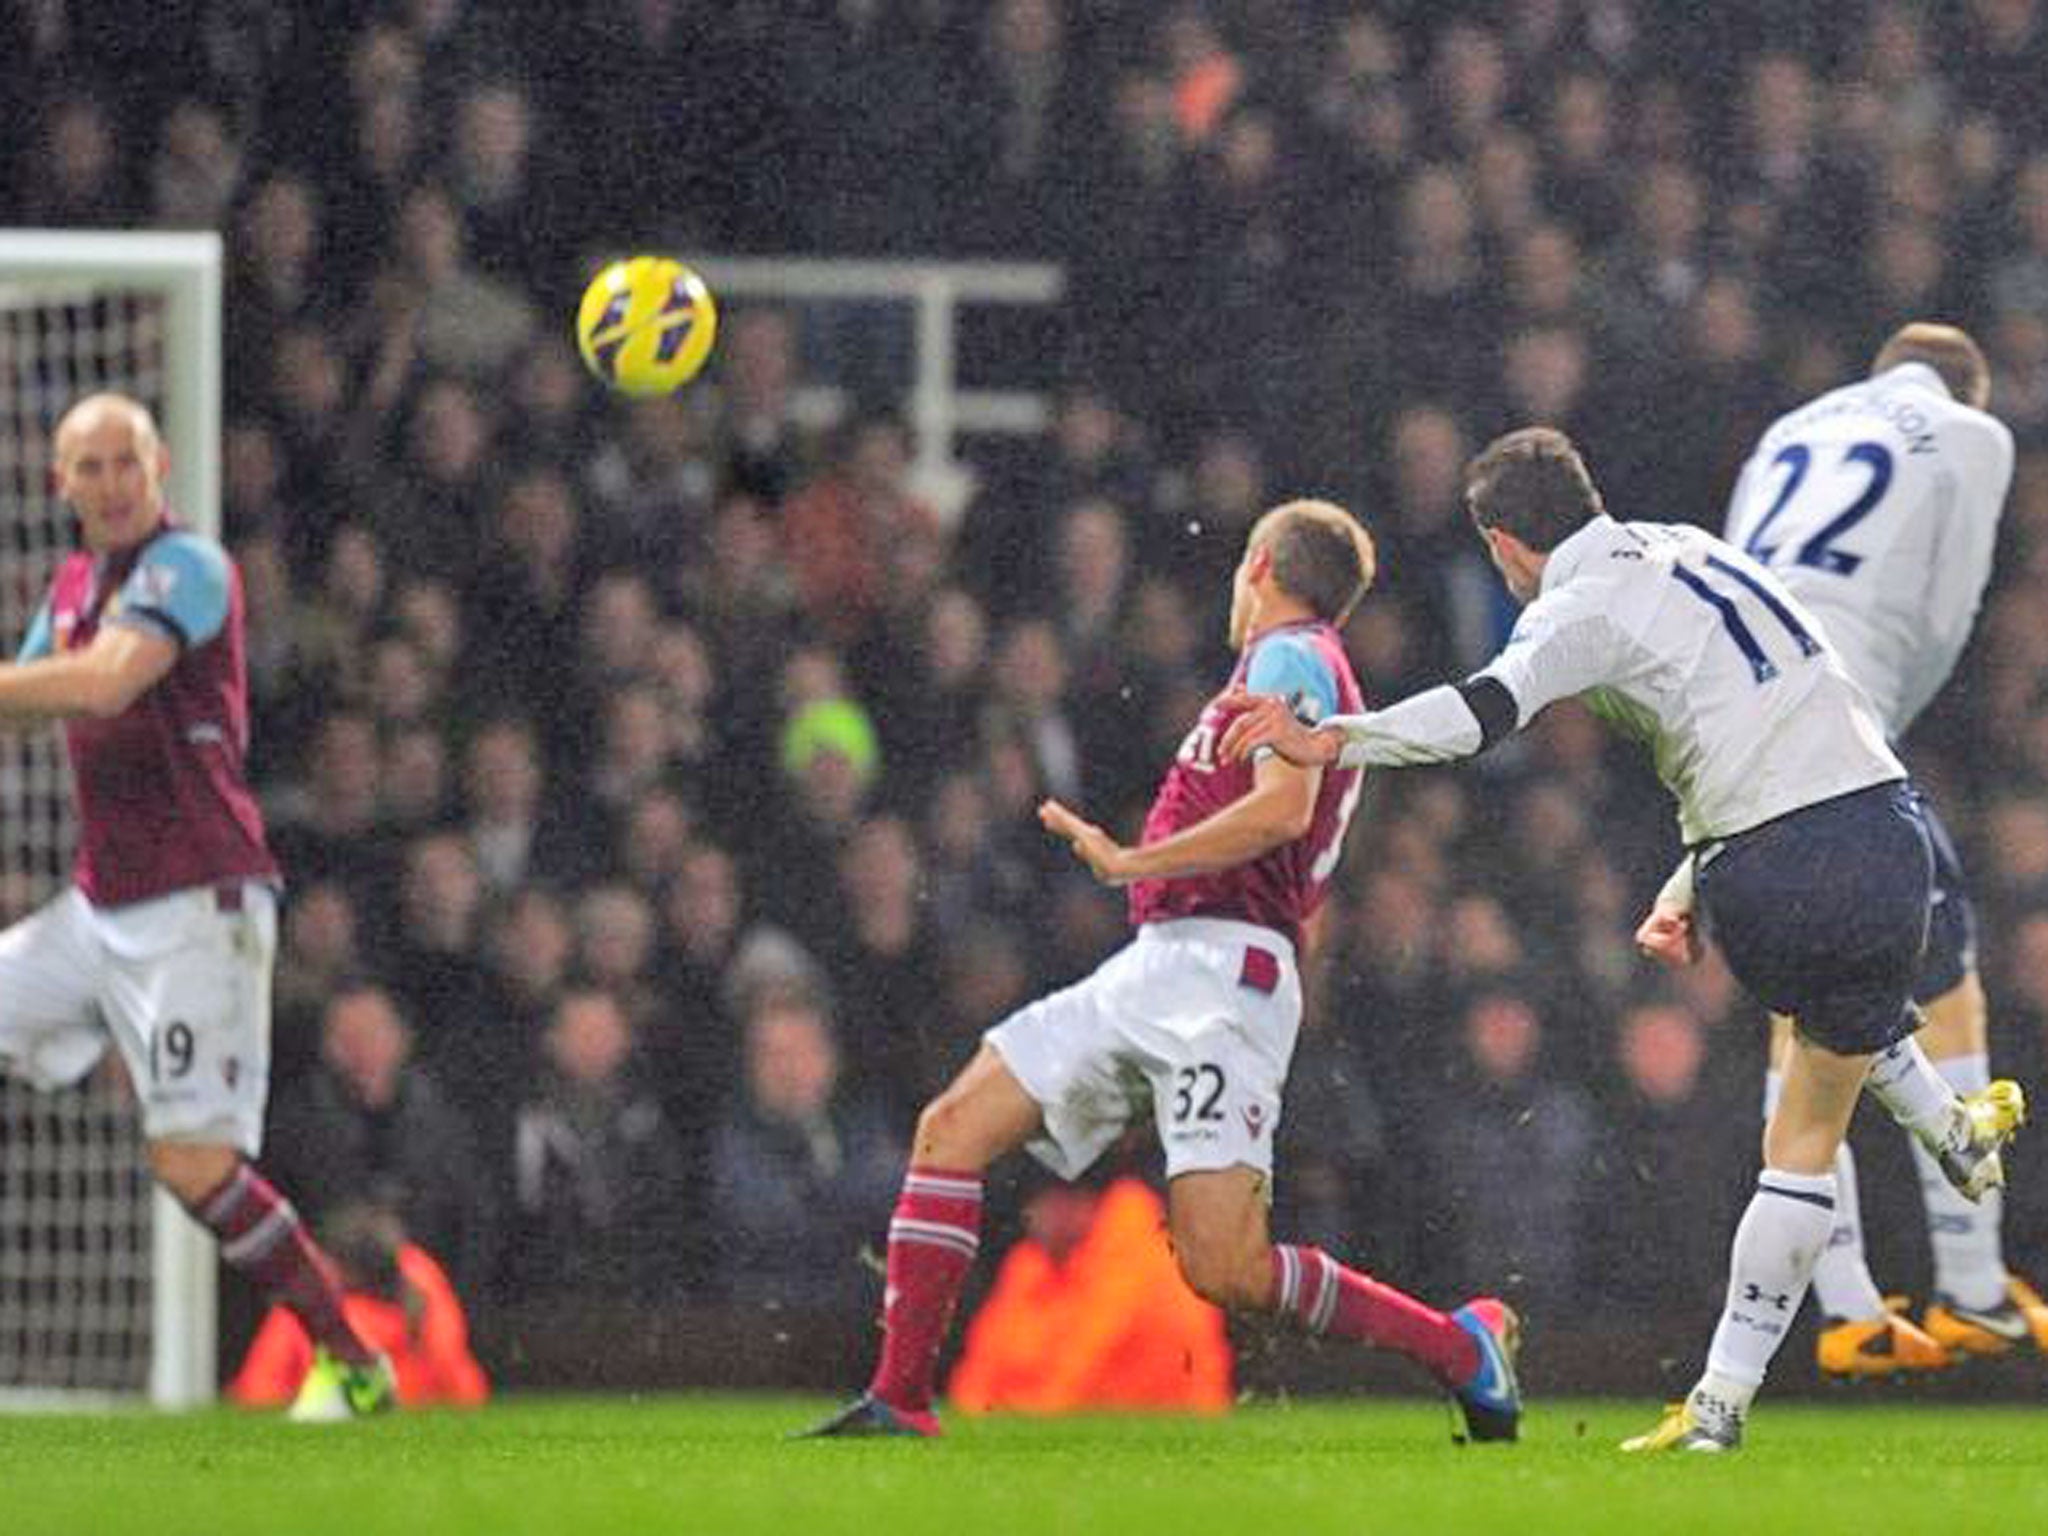 Bale arrows a shot into the top corner to win the match for Spurs